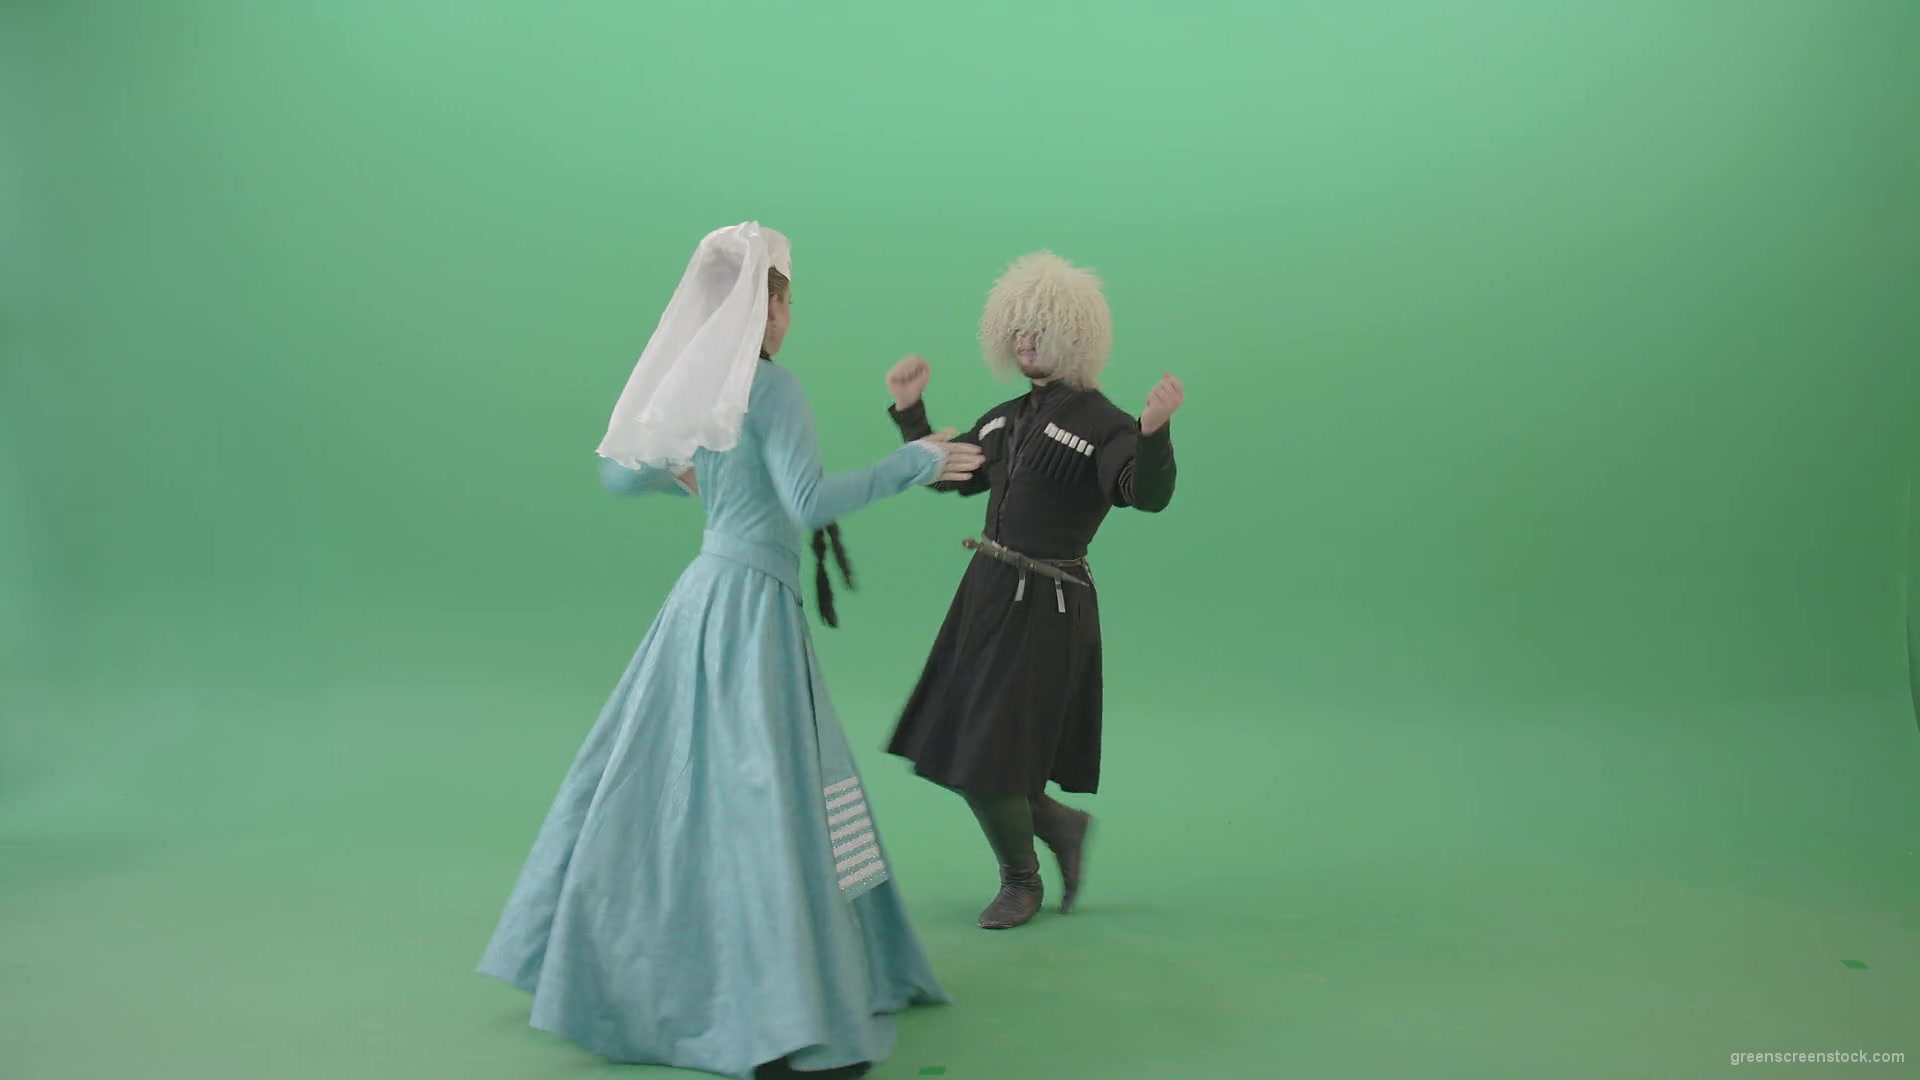 Gerogian-people-funny-dancing-with-smile-in-folk-dress-isolated-on-Green-Screen-4K-Video-Footage-1920_009 Green Screen Stock